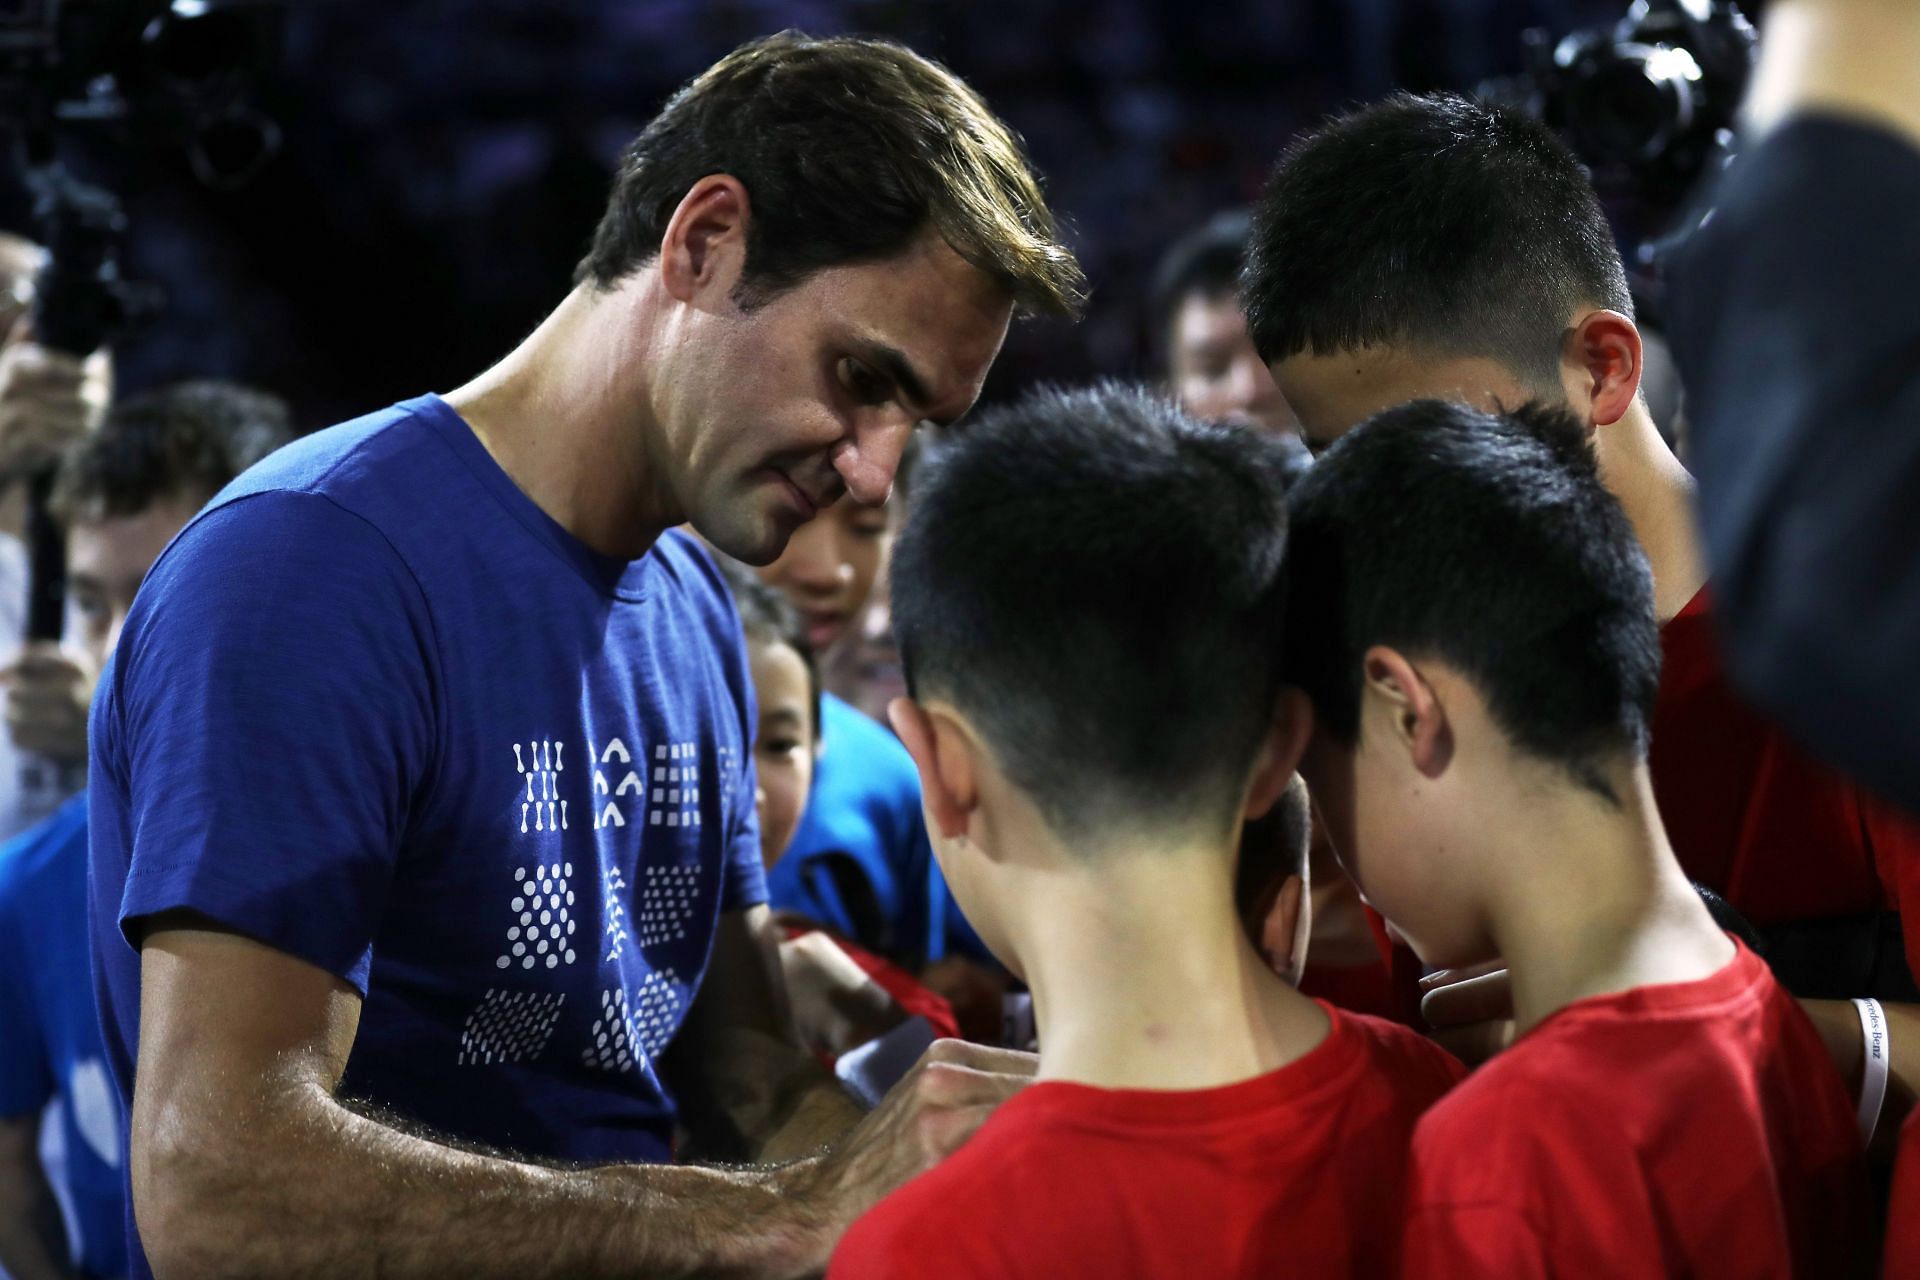 Roger Federer conducted a tennis clinic for kids